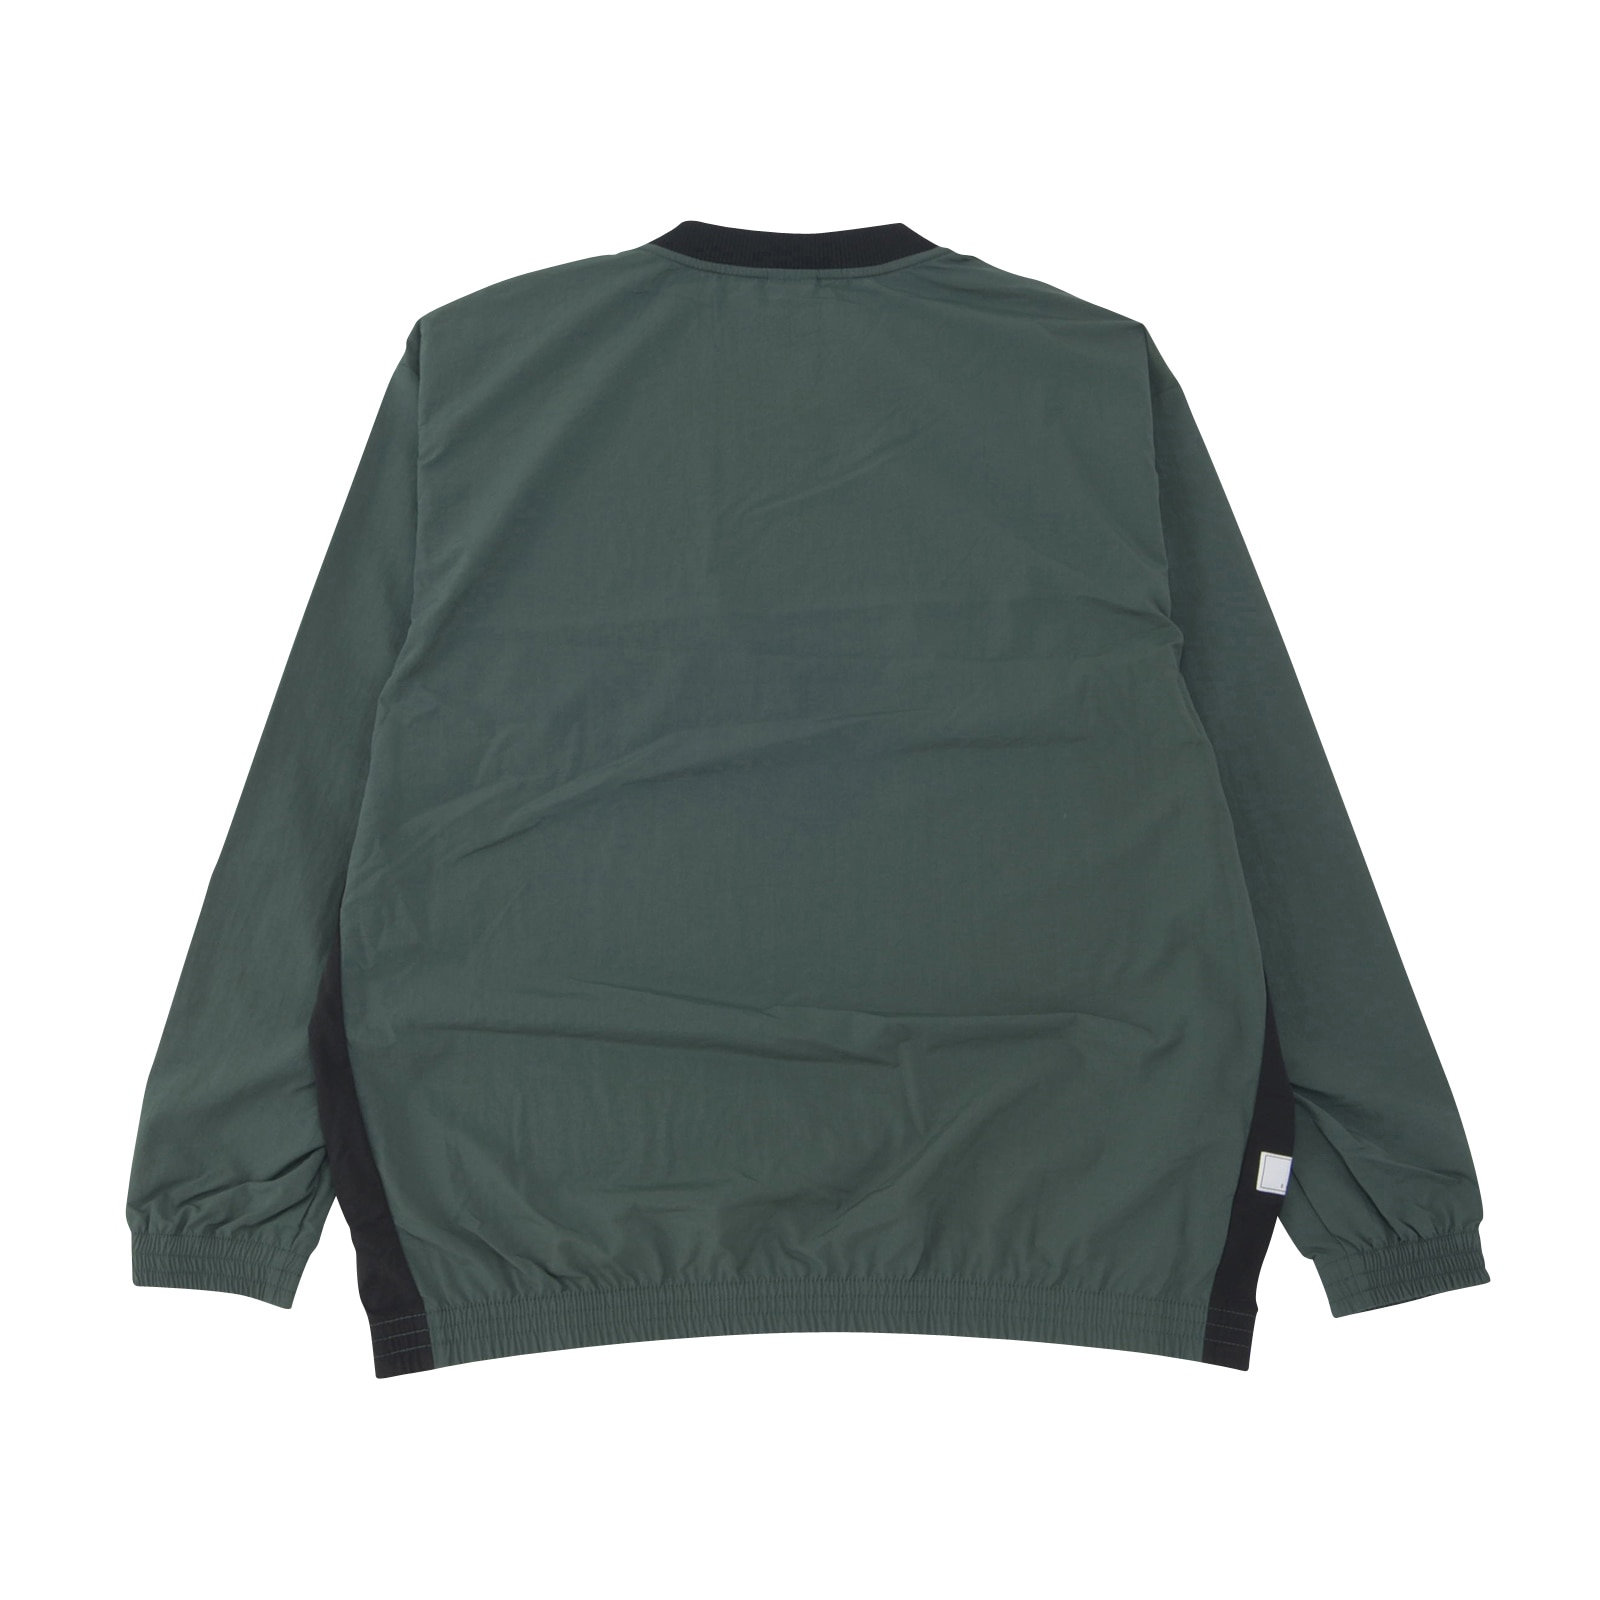 Pullover woven top